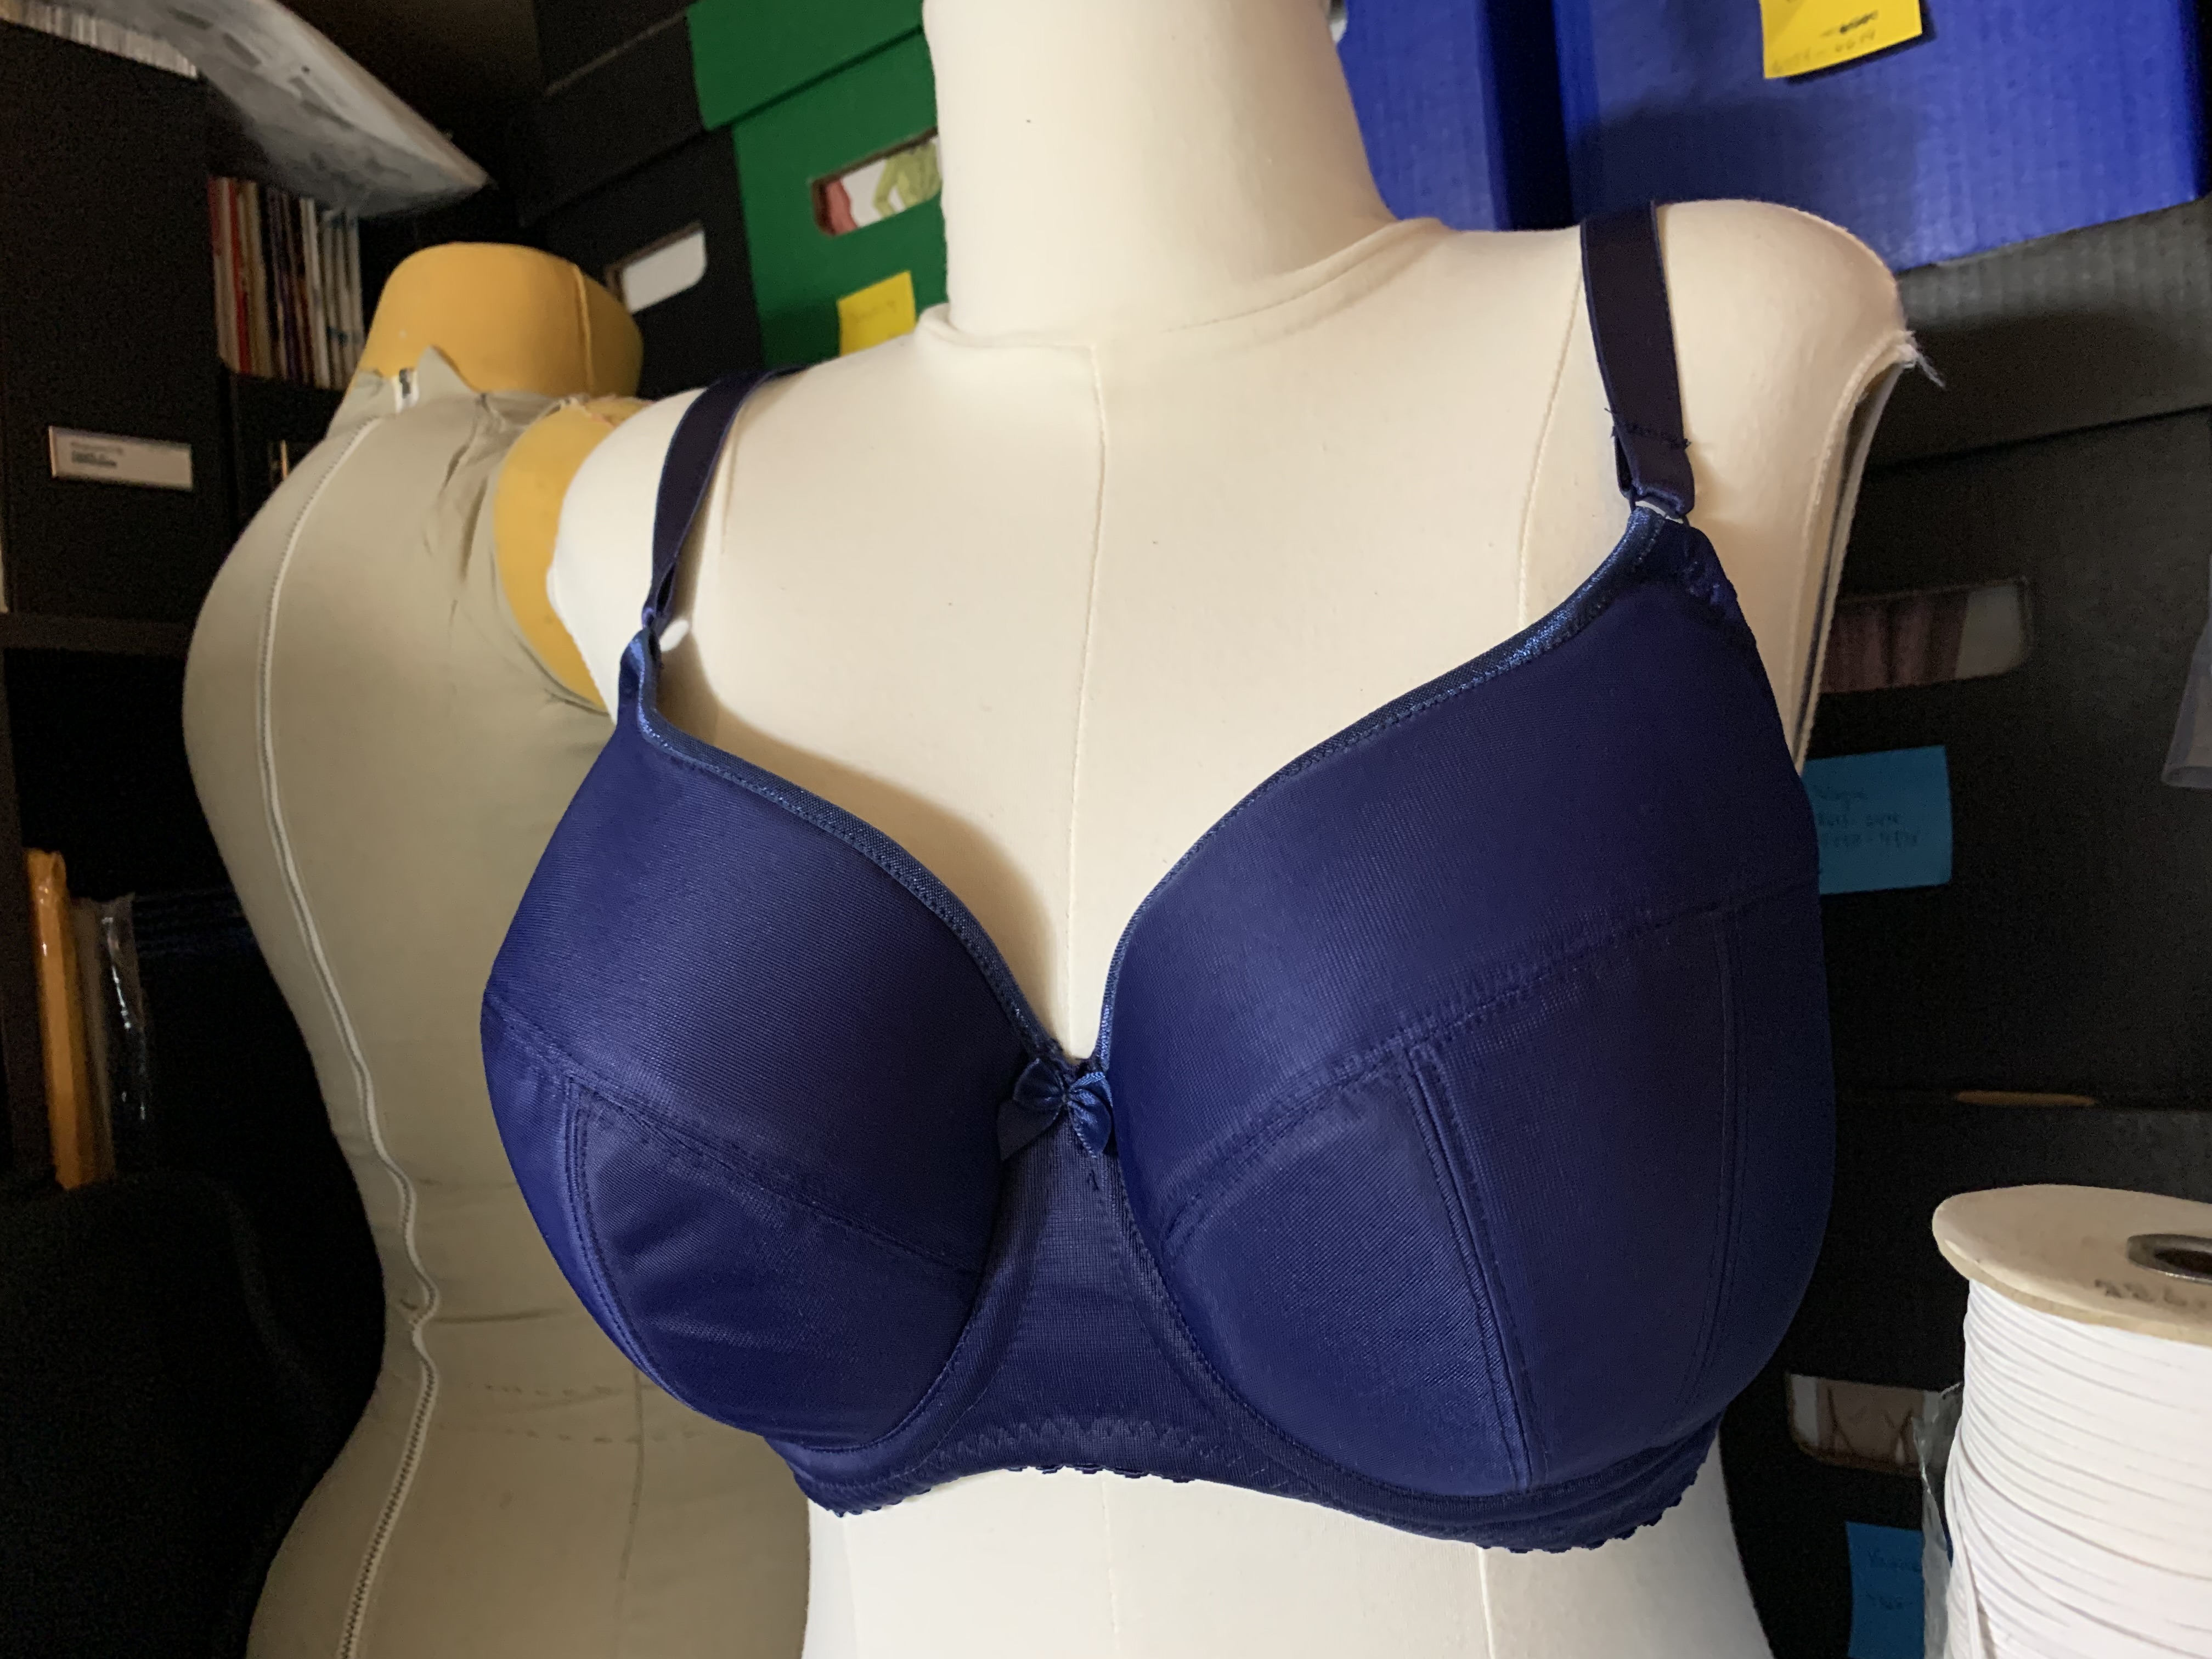 Woman shares epic bra fail after £1.99 plastic design squashes her